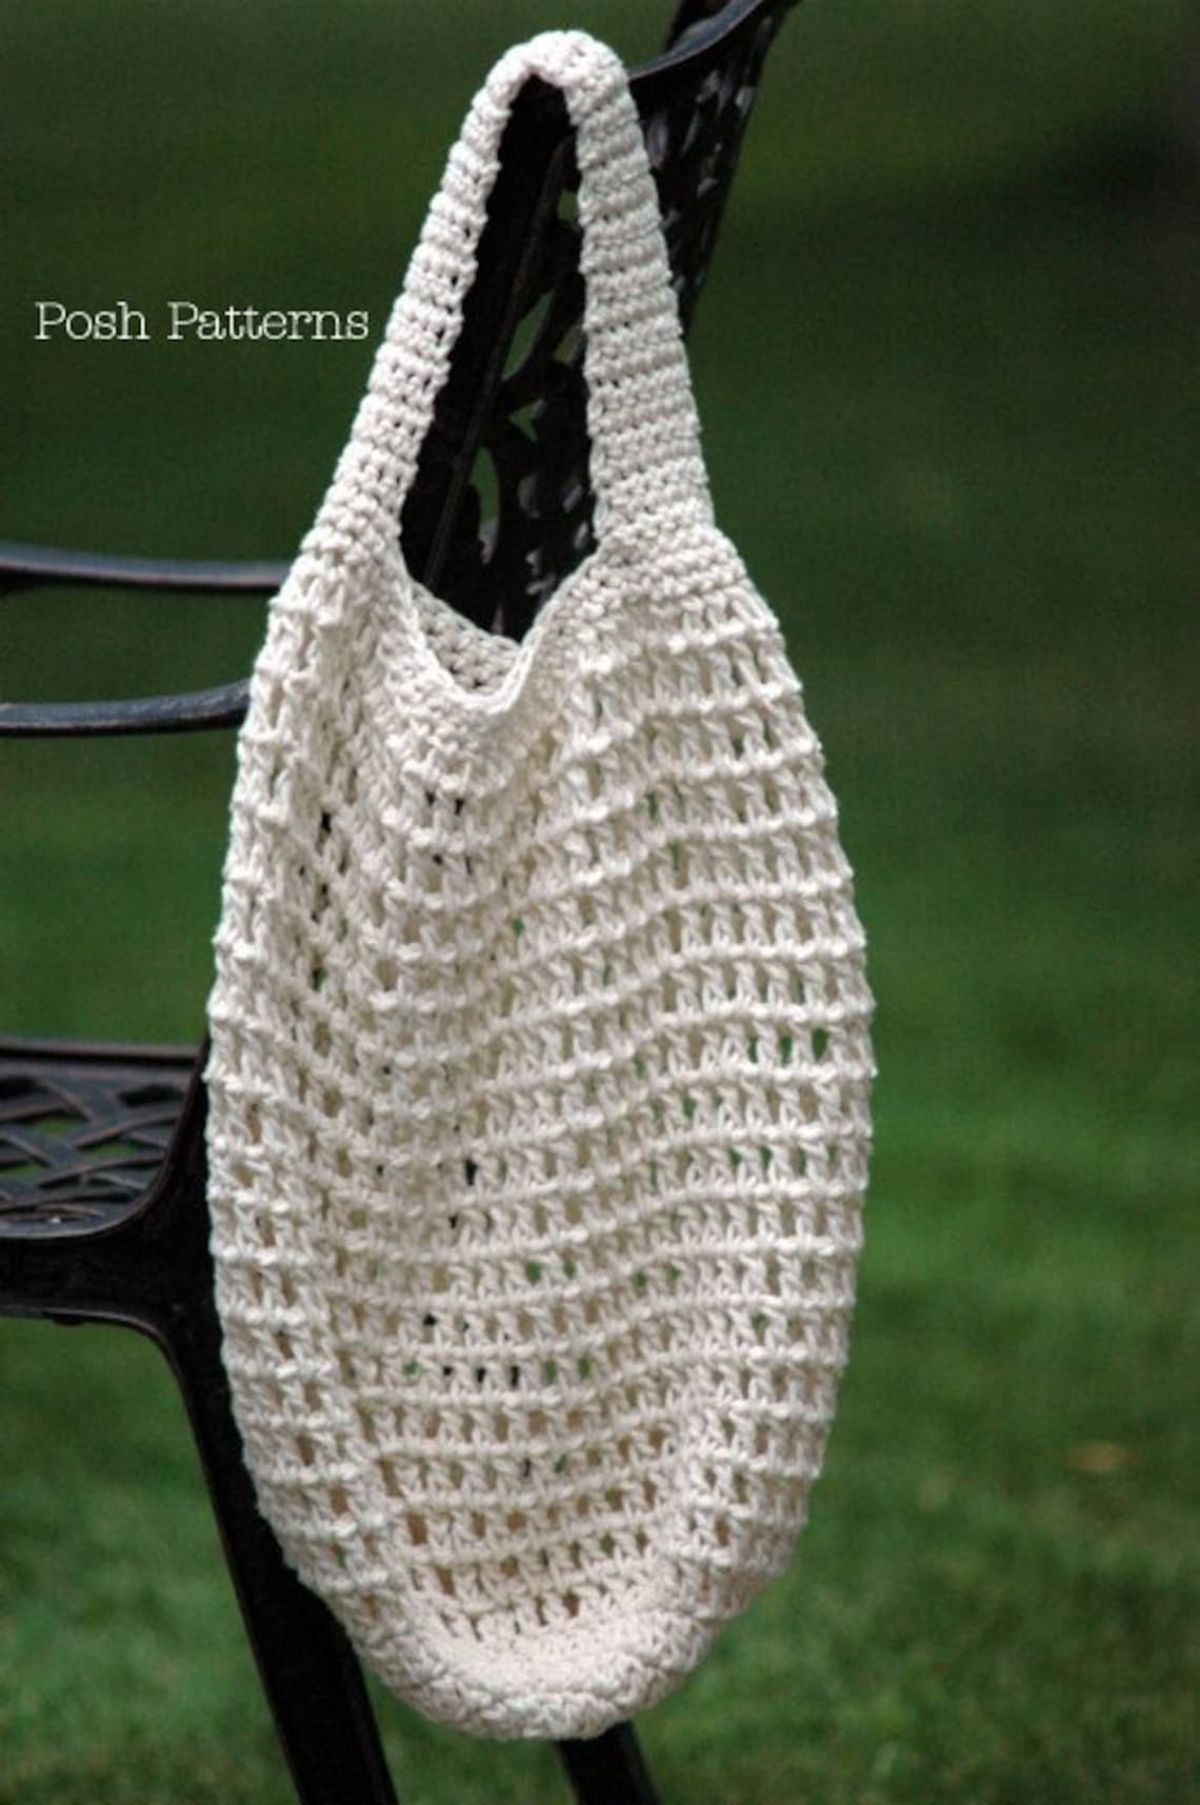 White crochet market bag with one thick shoulder strap hanging on the back of a black chair by some grass. 